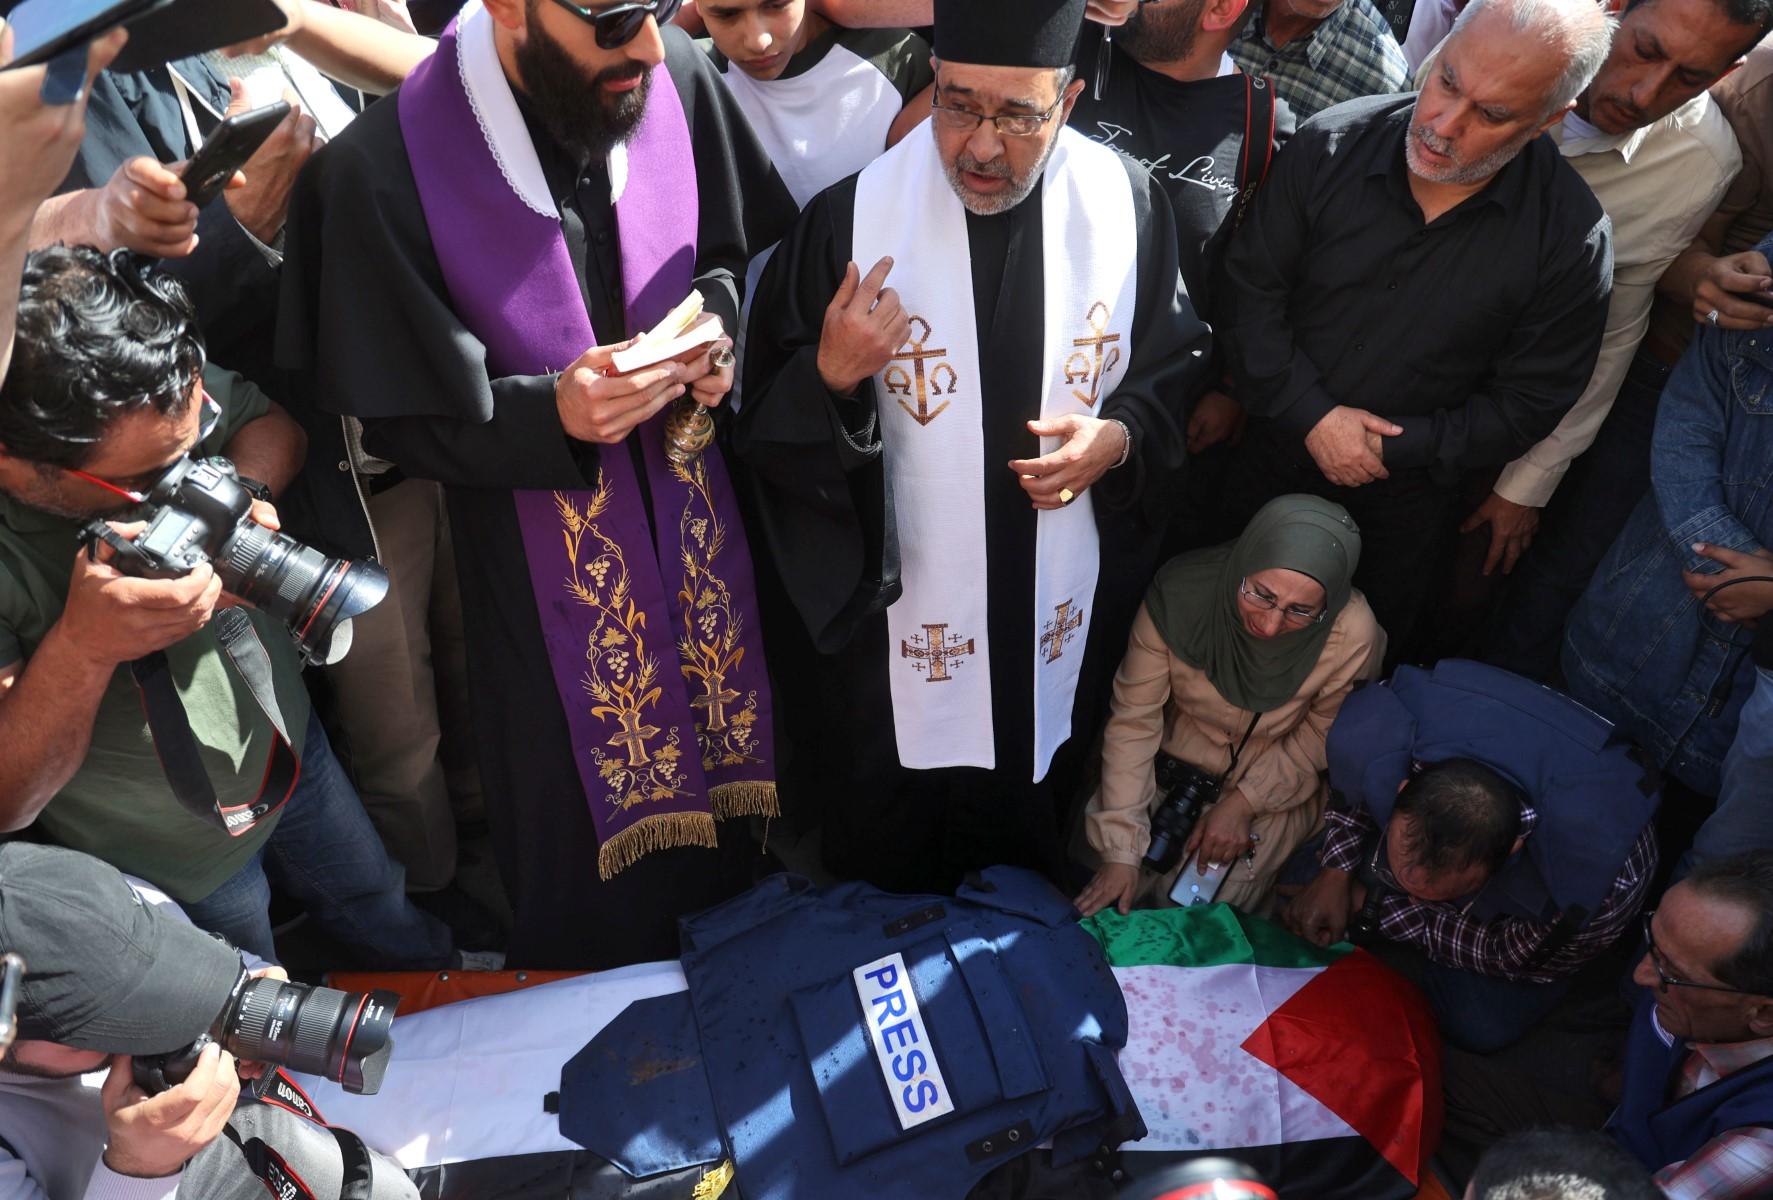 Priests, friends and relatives mourn over the body of veteran Al Jazeera journalist Shireen Abu Aqleh, who was shot dead by Israeli troops as she covered a raid on the West Bank's Jenin refugee camp, on May 11. Photo: AFP